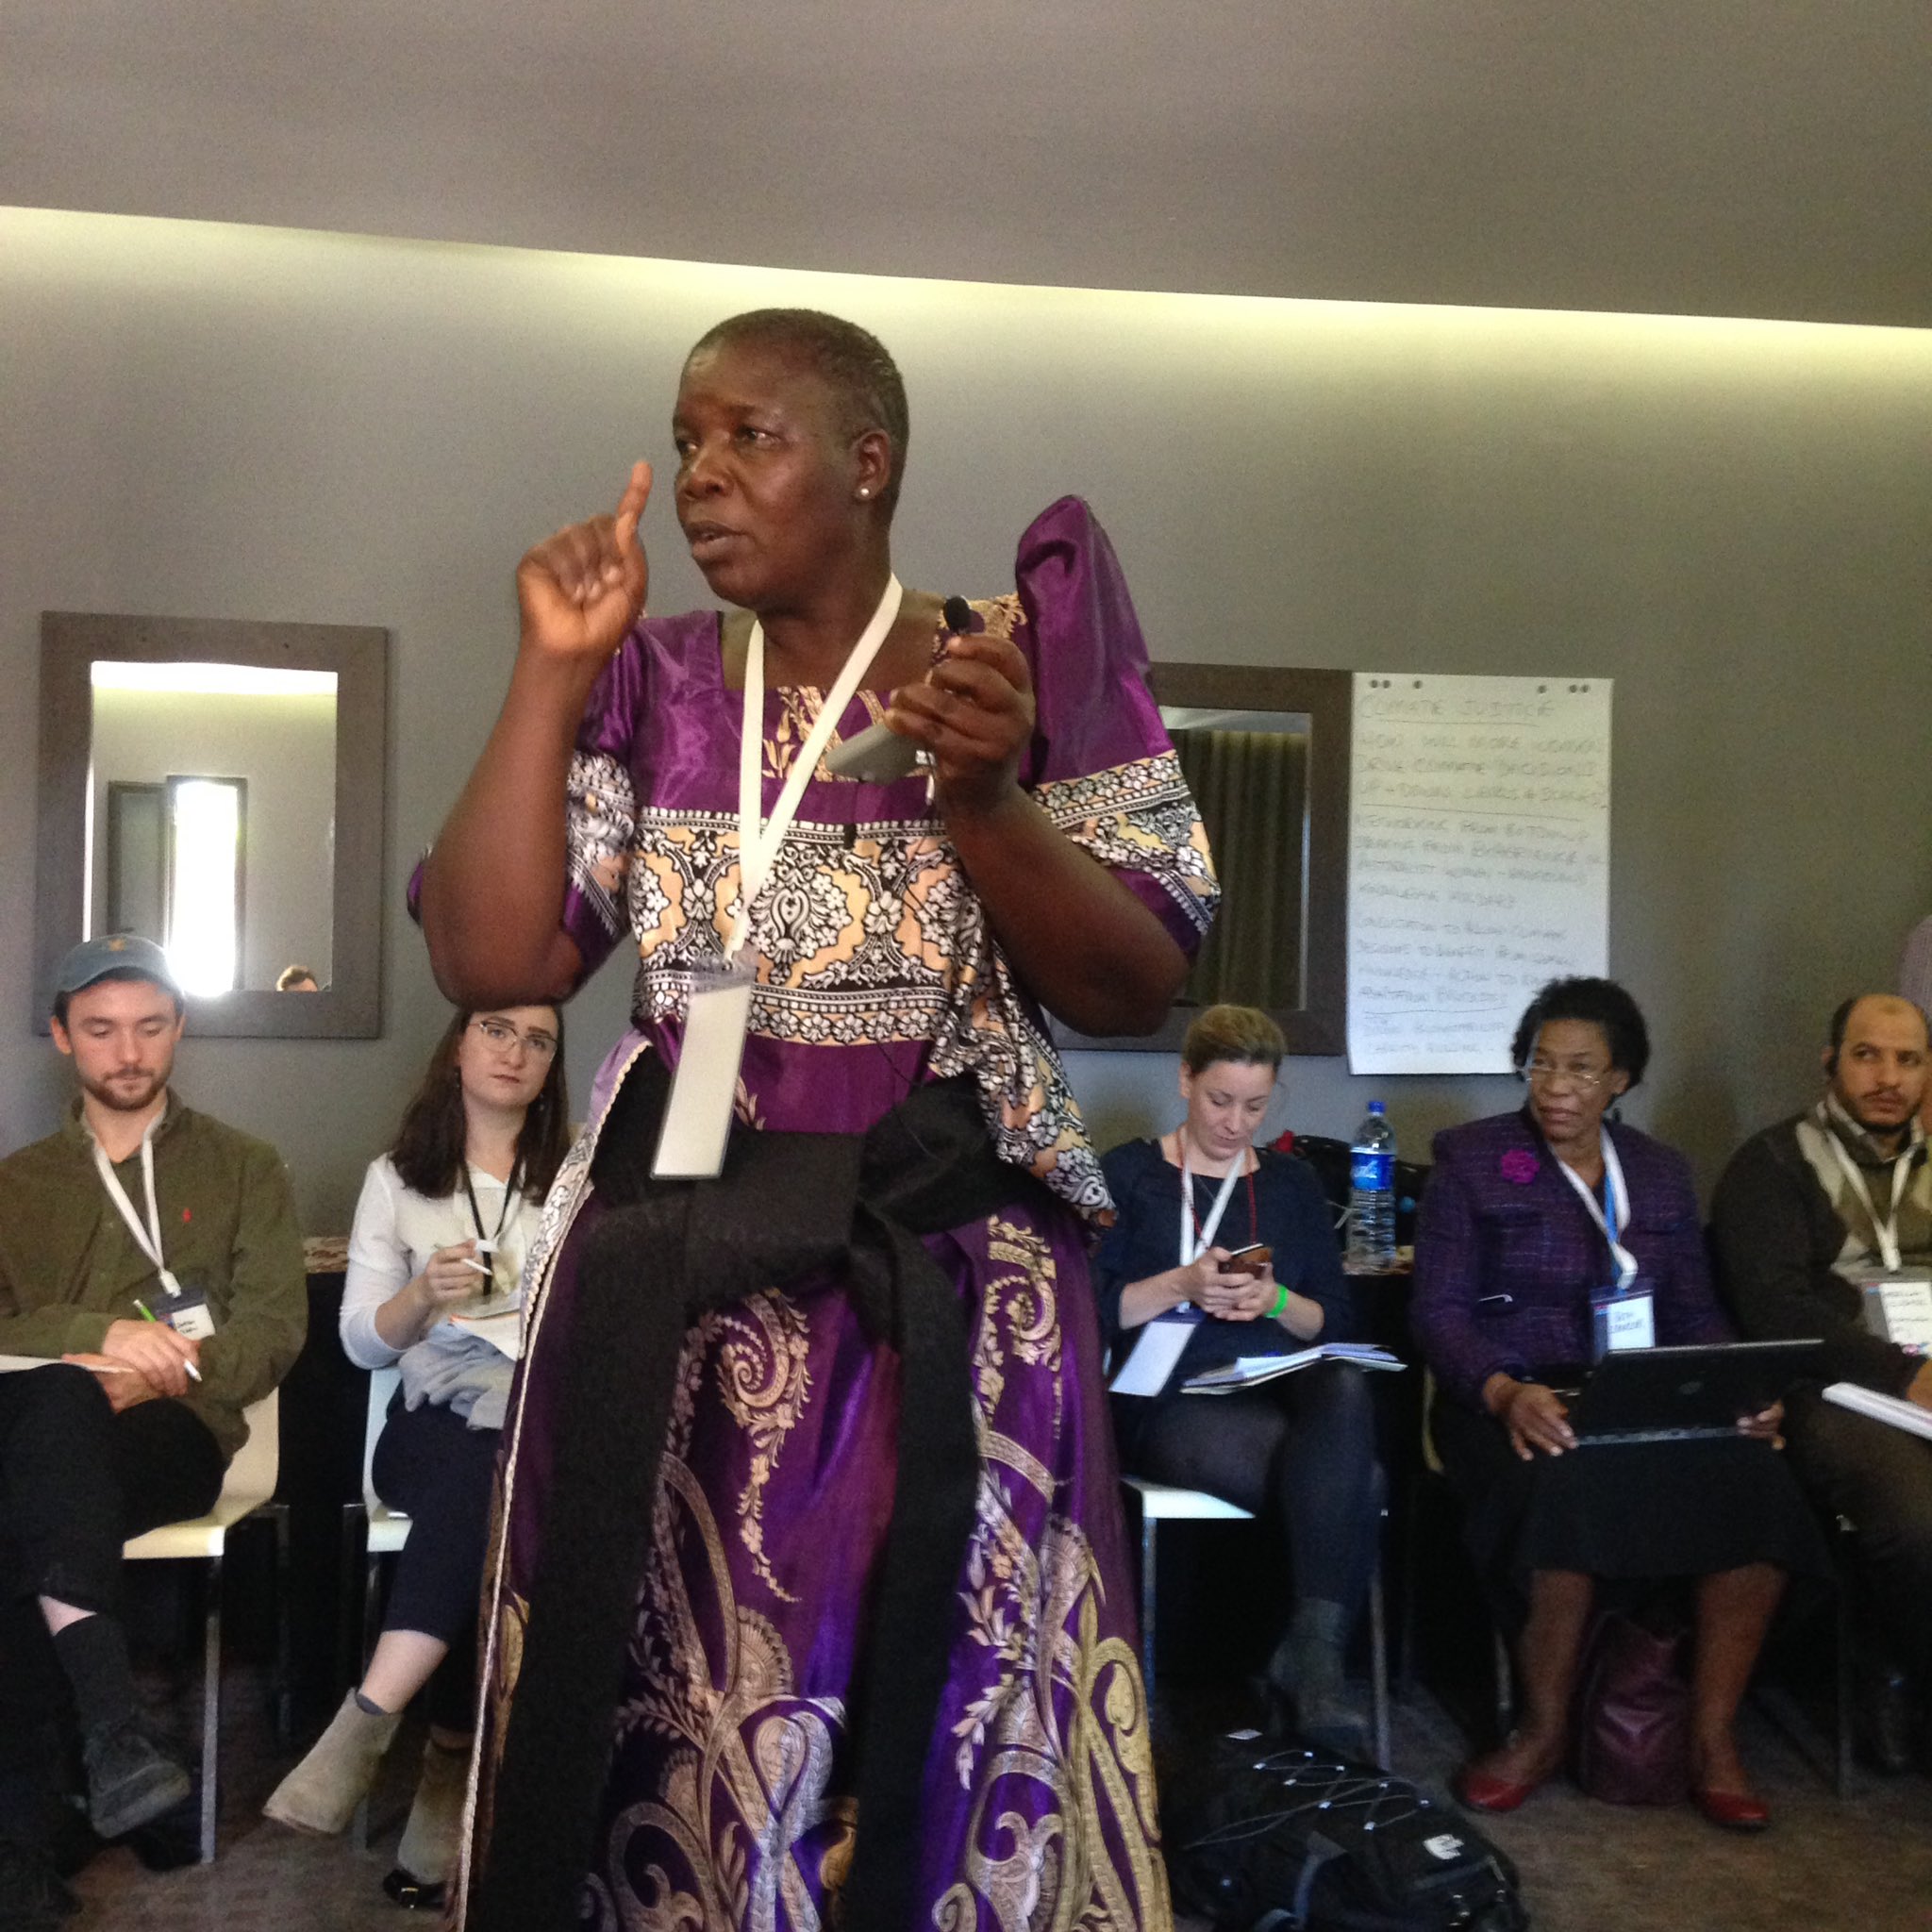 #DCdays #MRFCJ "we organized the women to have one voice.  We can't wait.  We begin" Constance Okollet https://t.co/c1PhAfZX8M